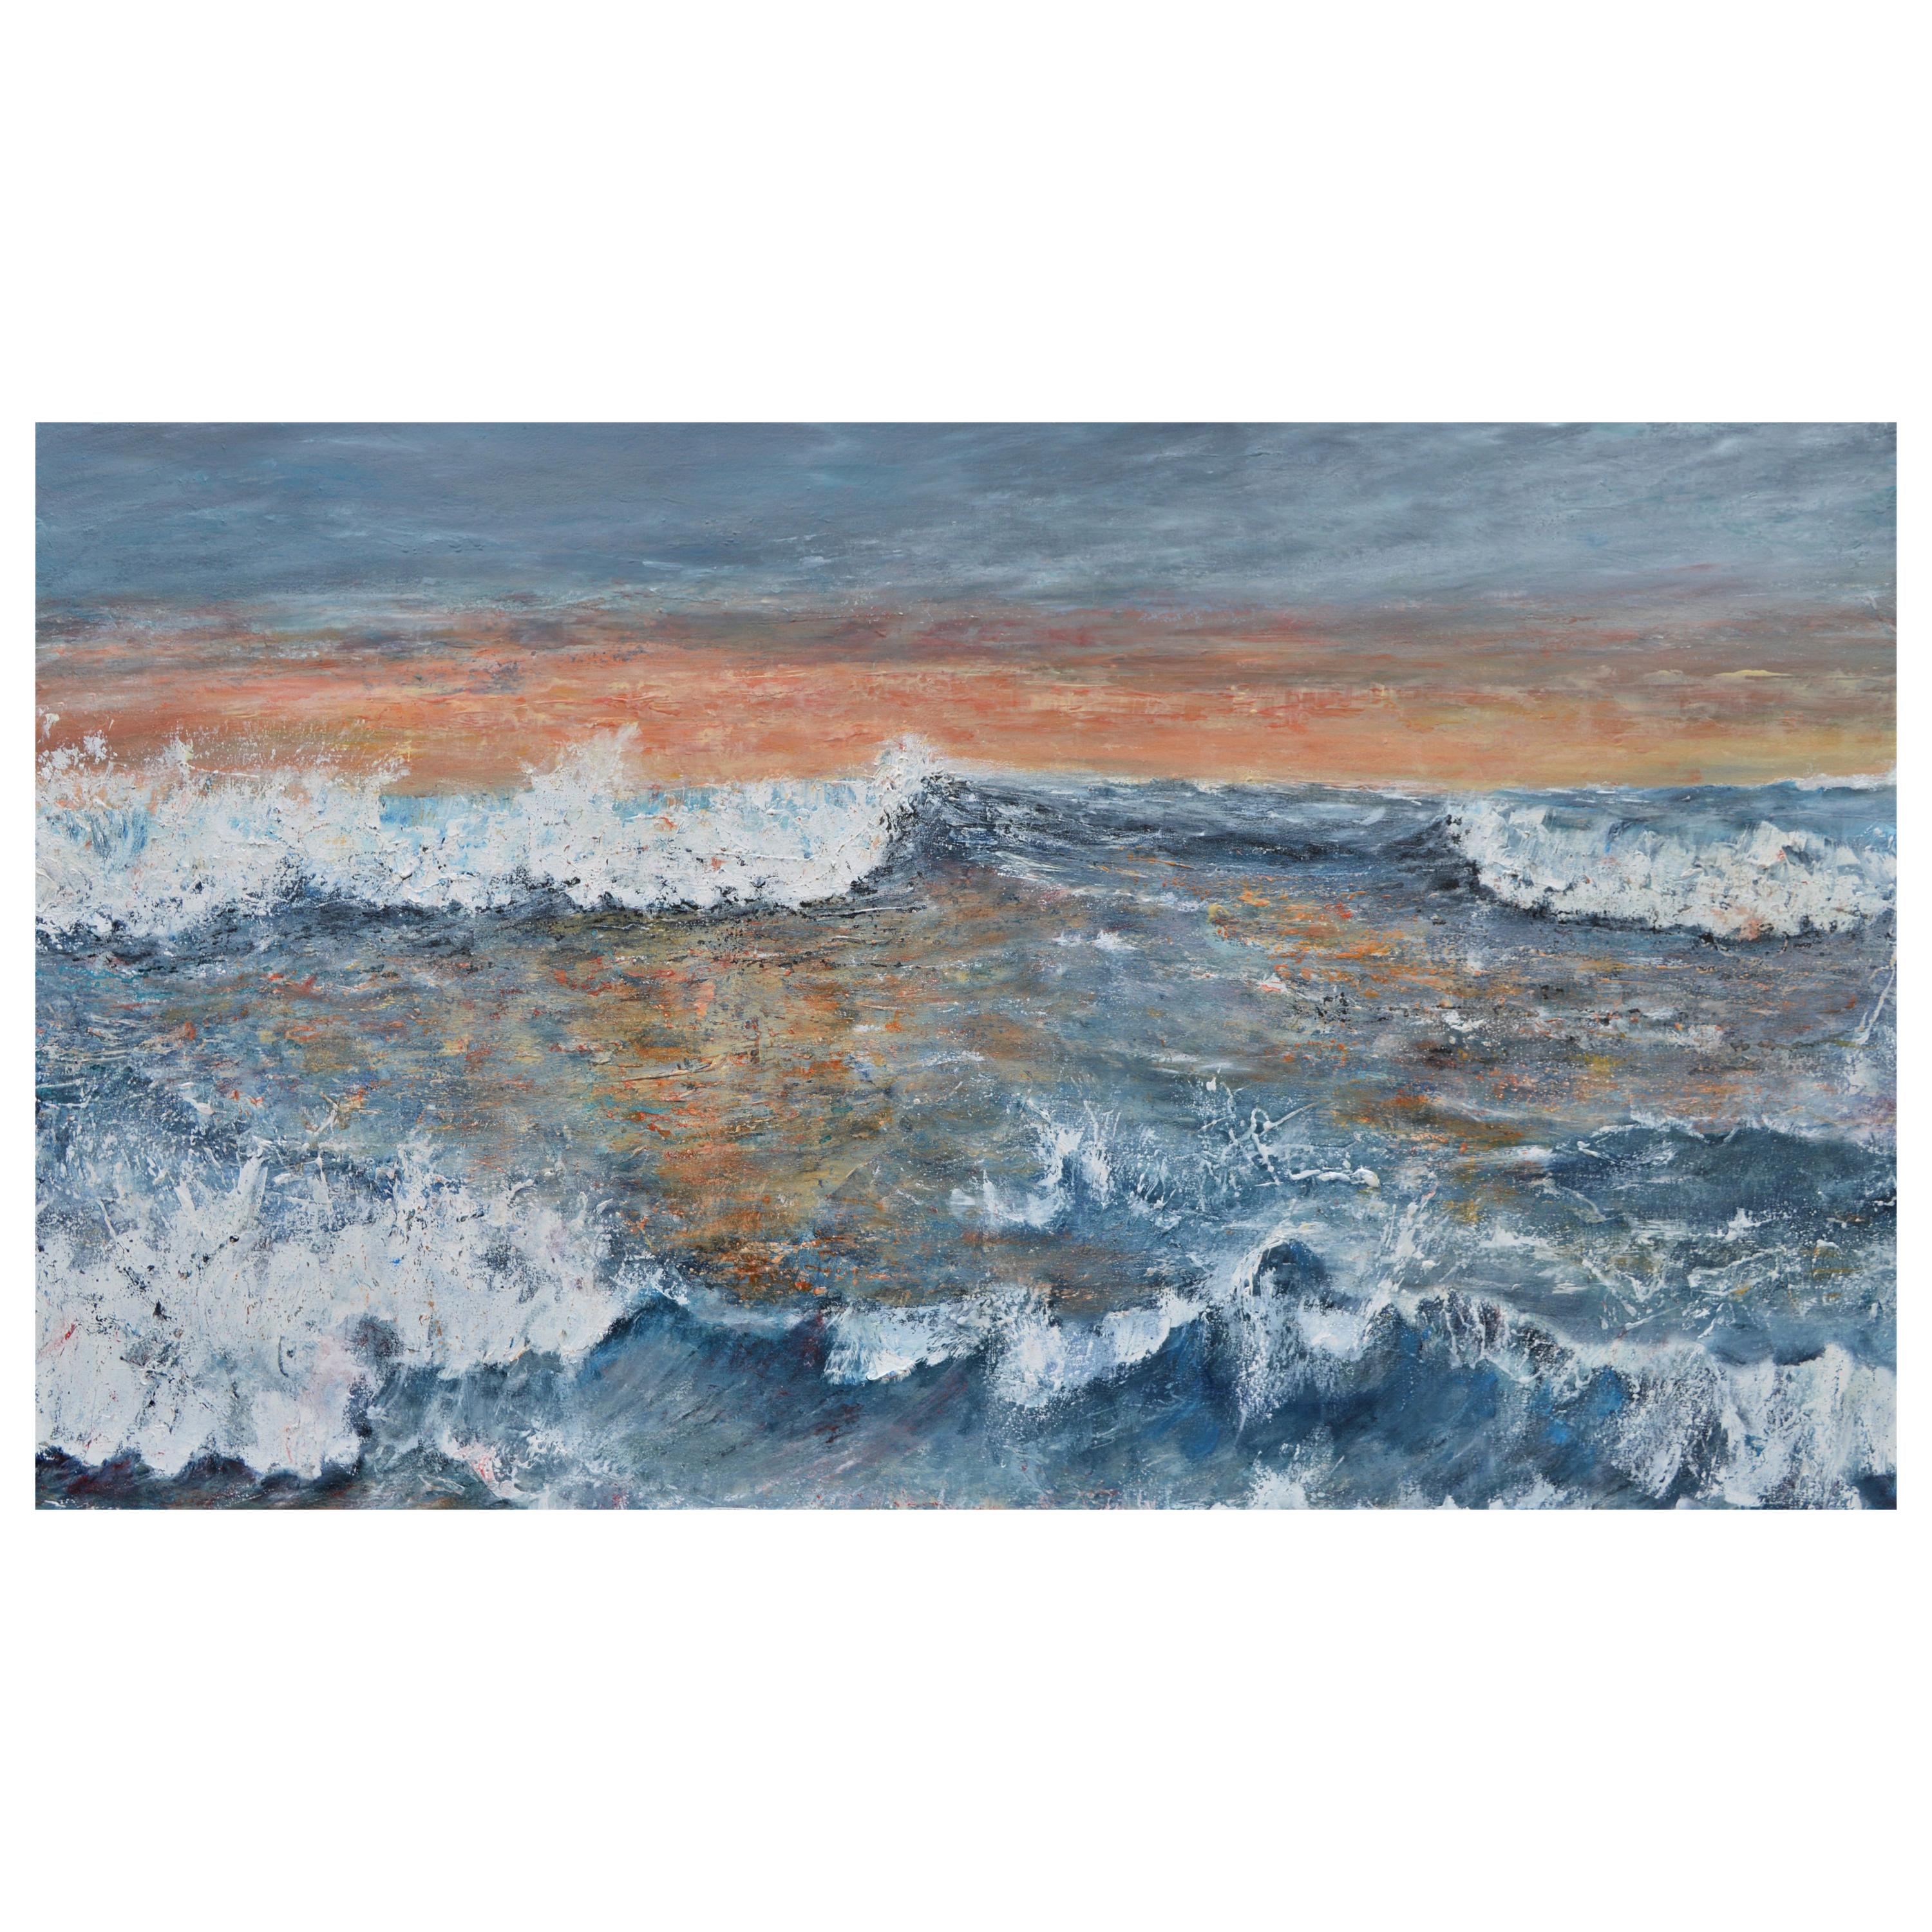 Western Promise: A Good Day Beckons, Large Contemporary Seascape Oil Painting For Sale